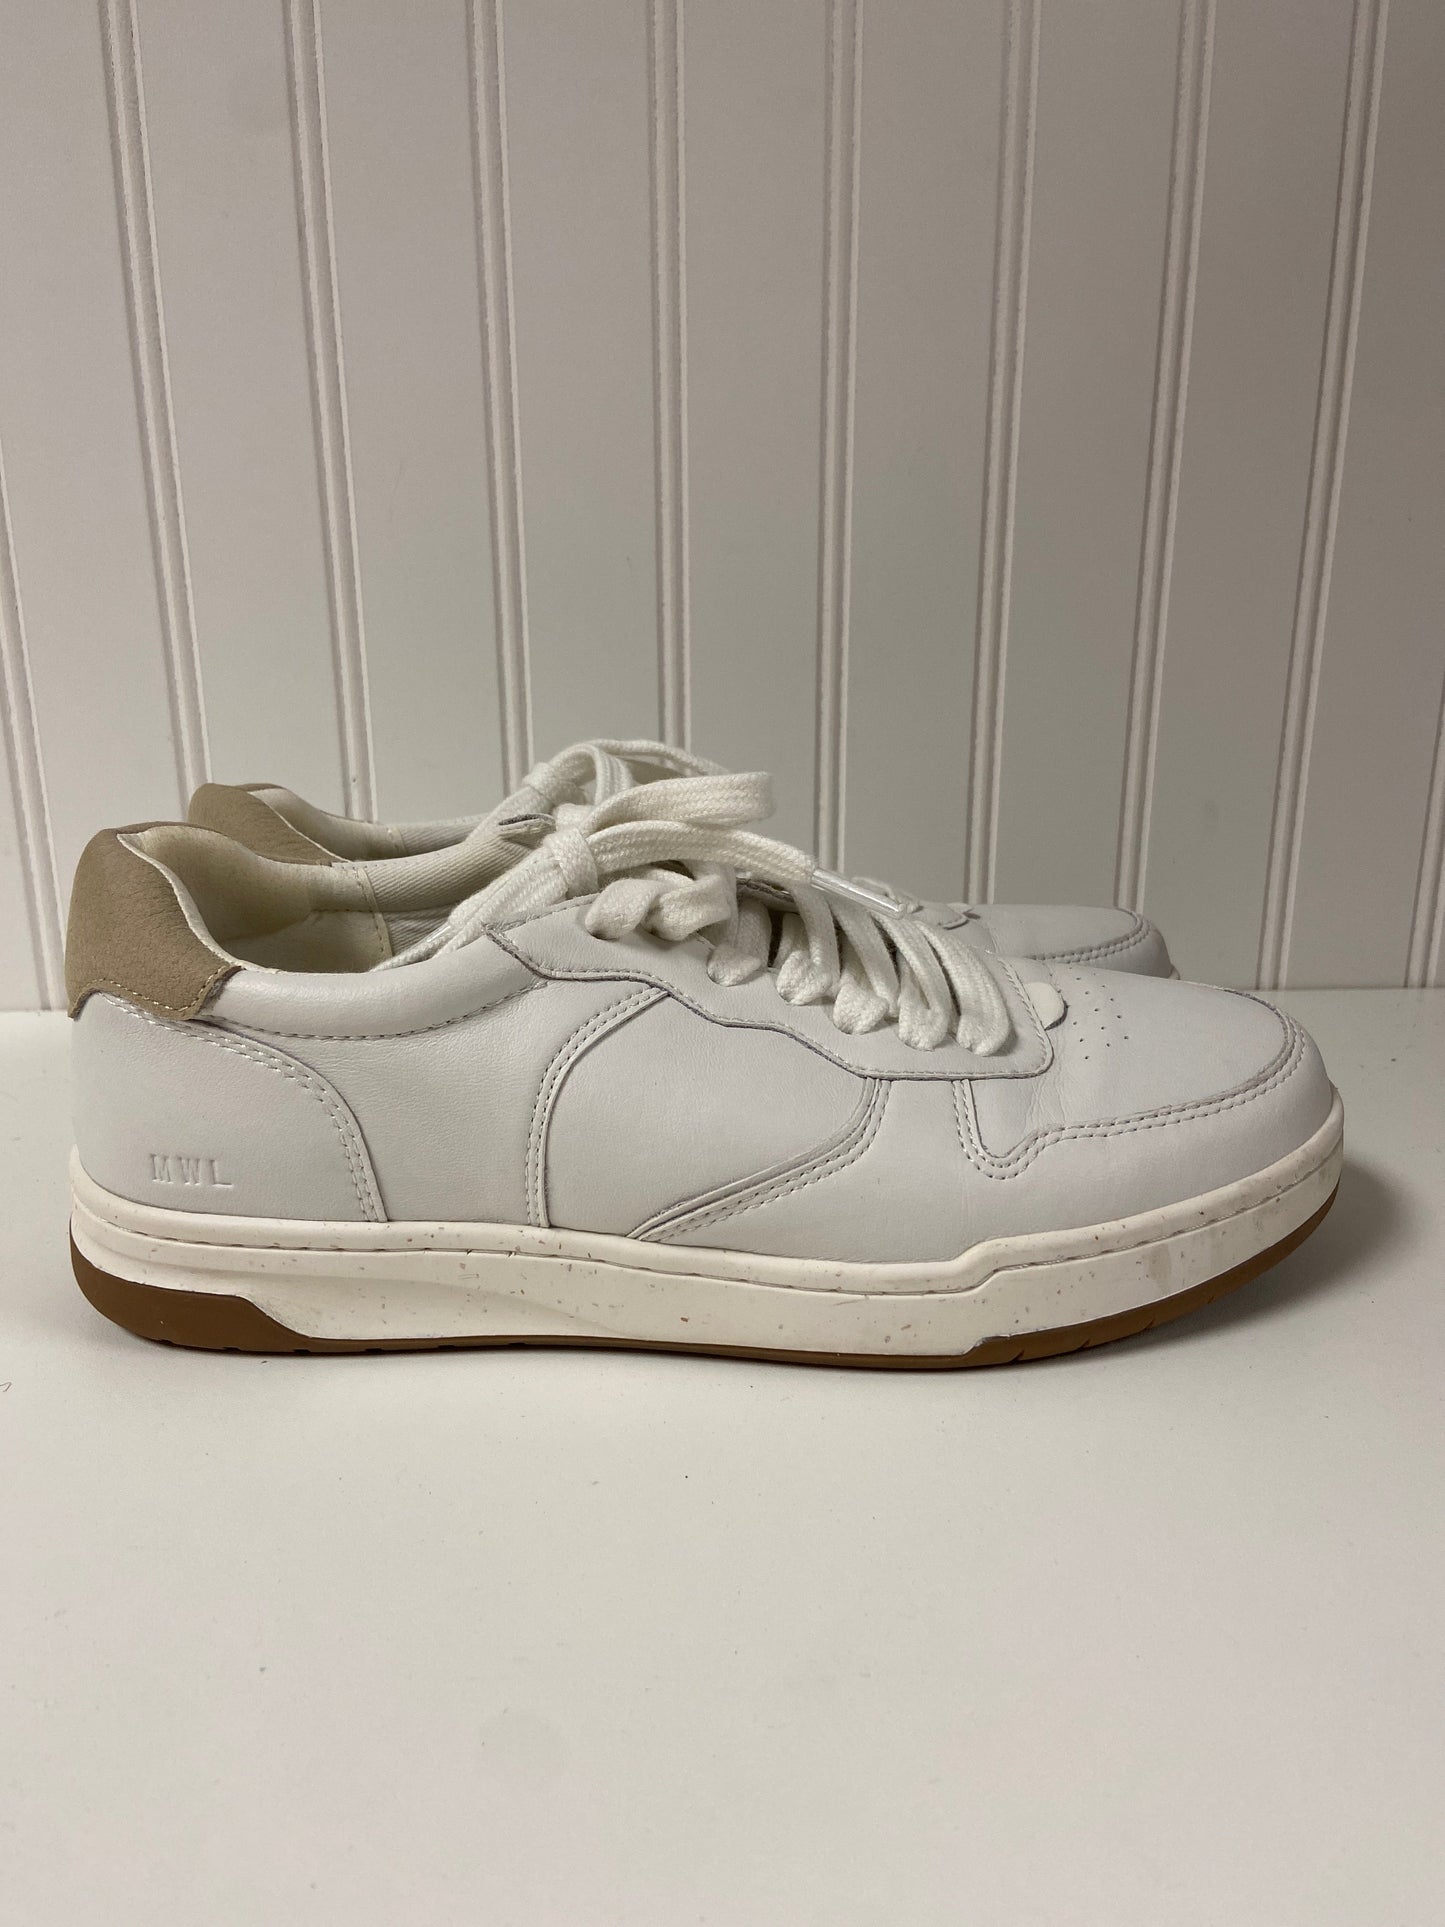 White Shoes Sneakers Madewell, Size 8